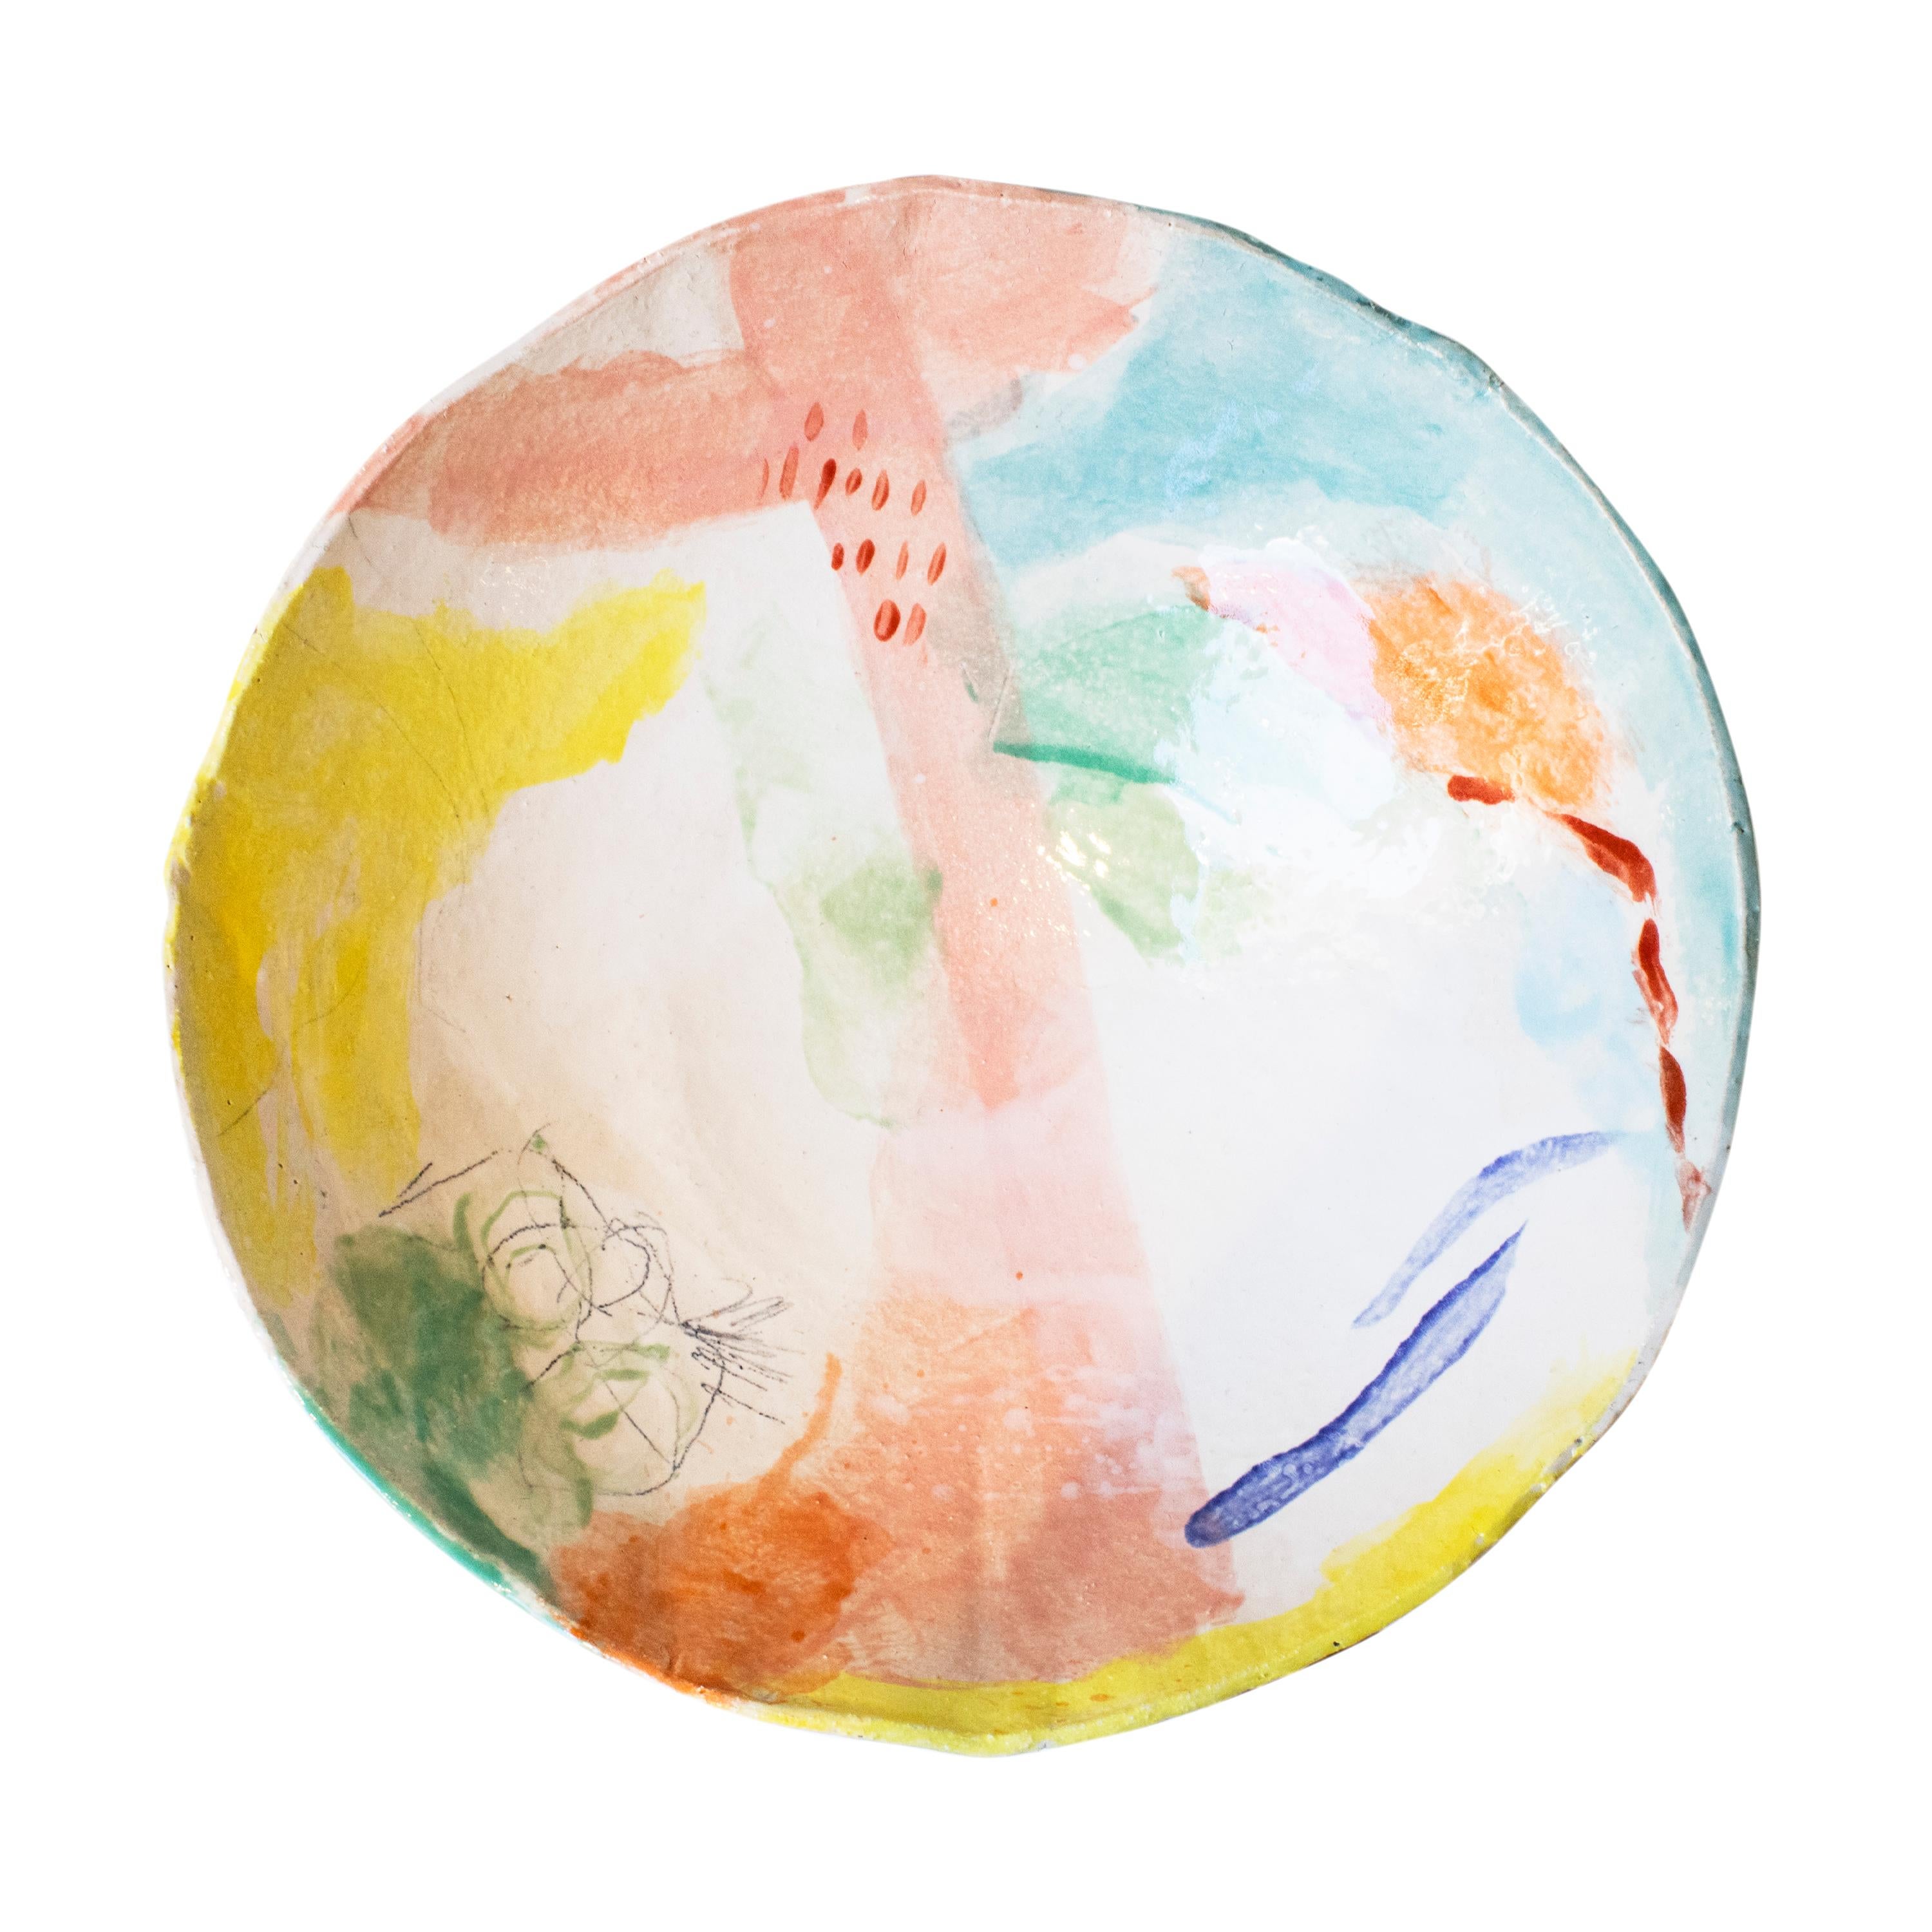 Handcrafted and painted modern bowl designed by Spanish artist Ana Laso.

ANA LASO BAEZA is an artist from Madrid who develops her activity fundamentally as a painter and, for a few years, also as a ceramicist. She trained pictorially at the Prado